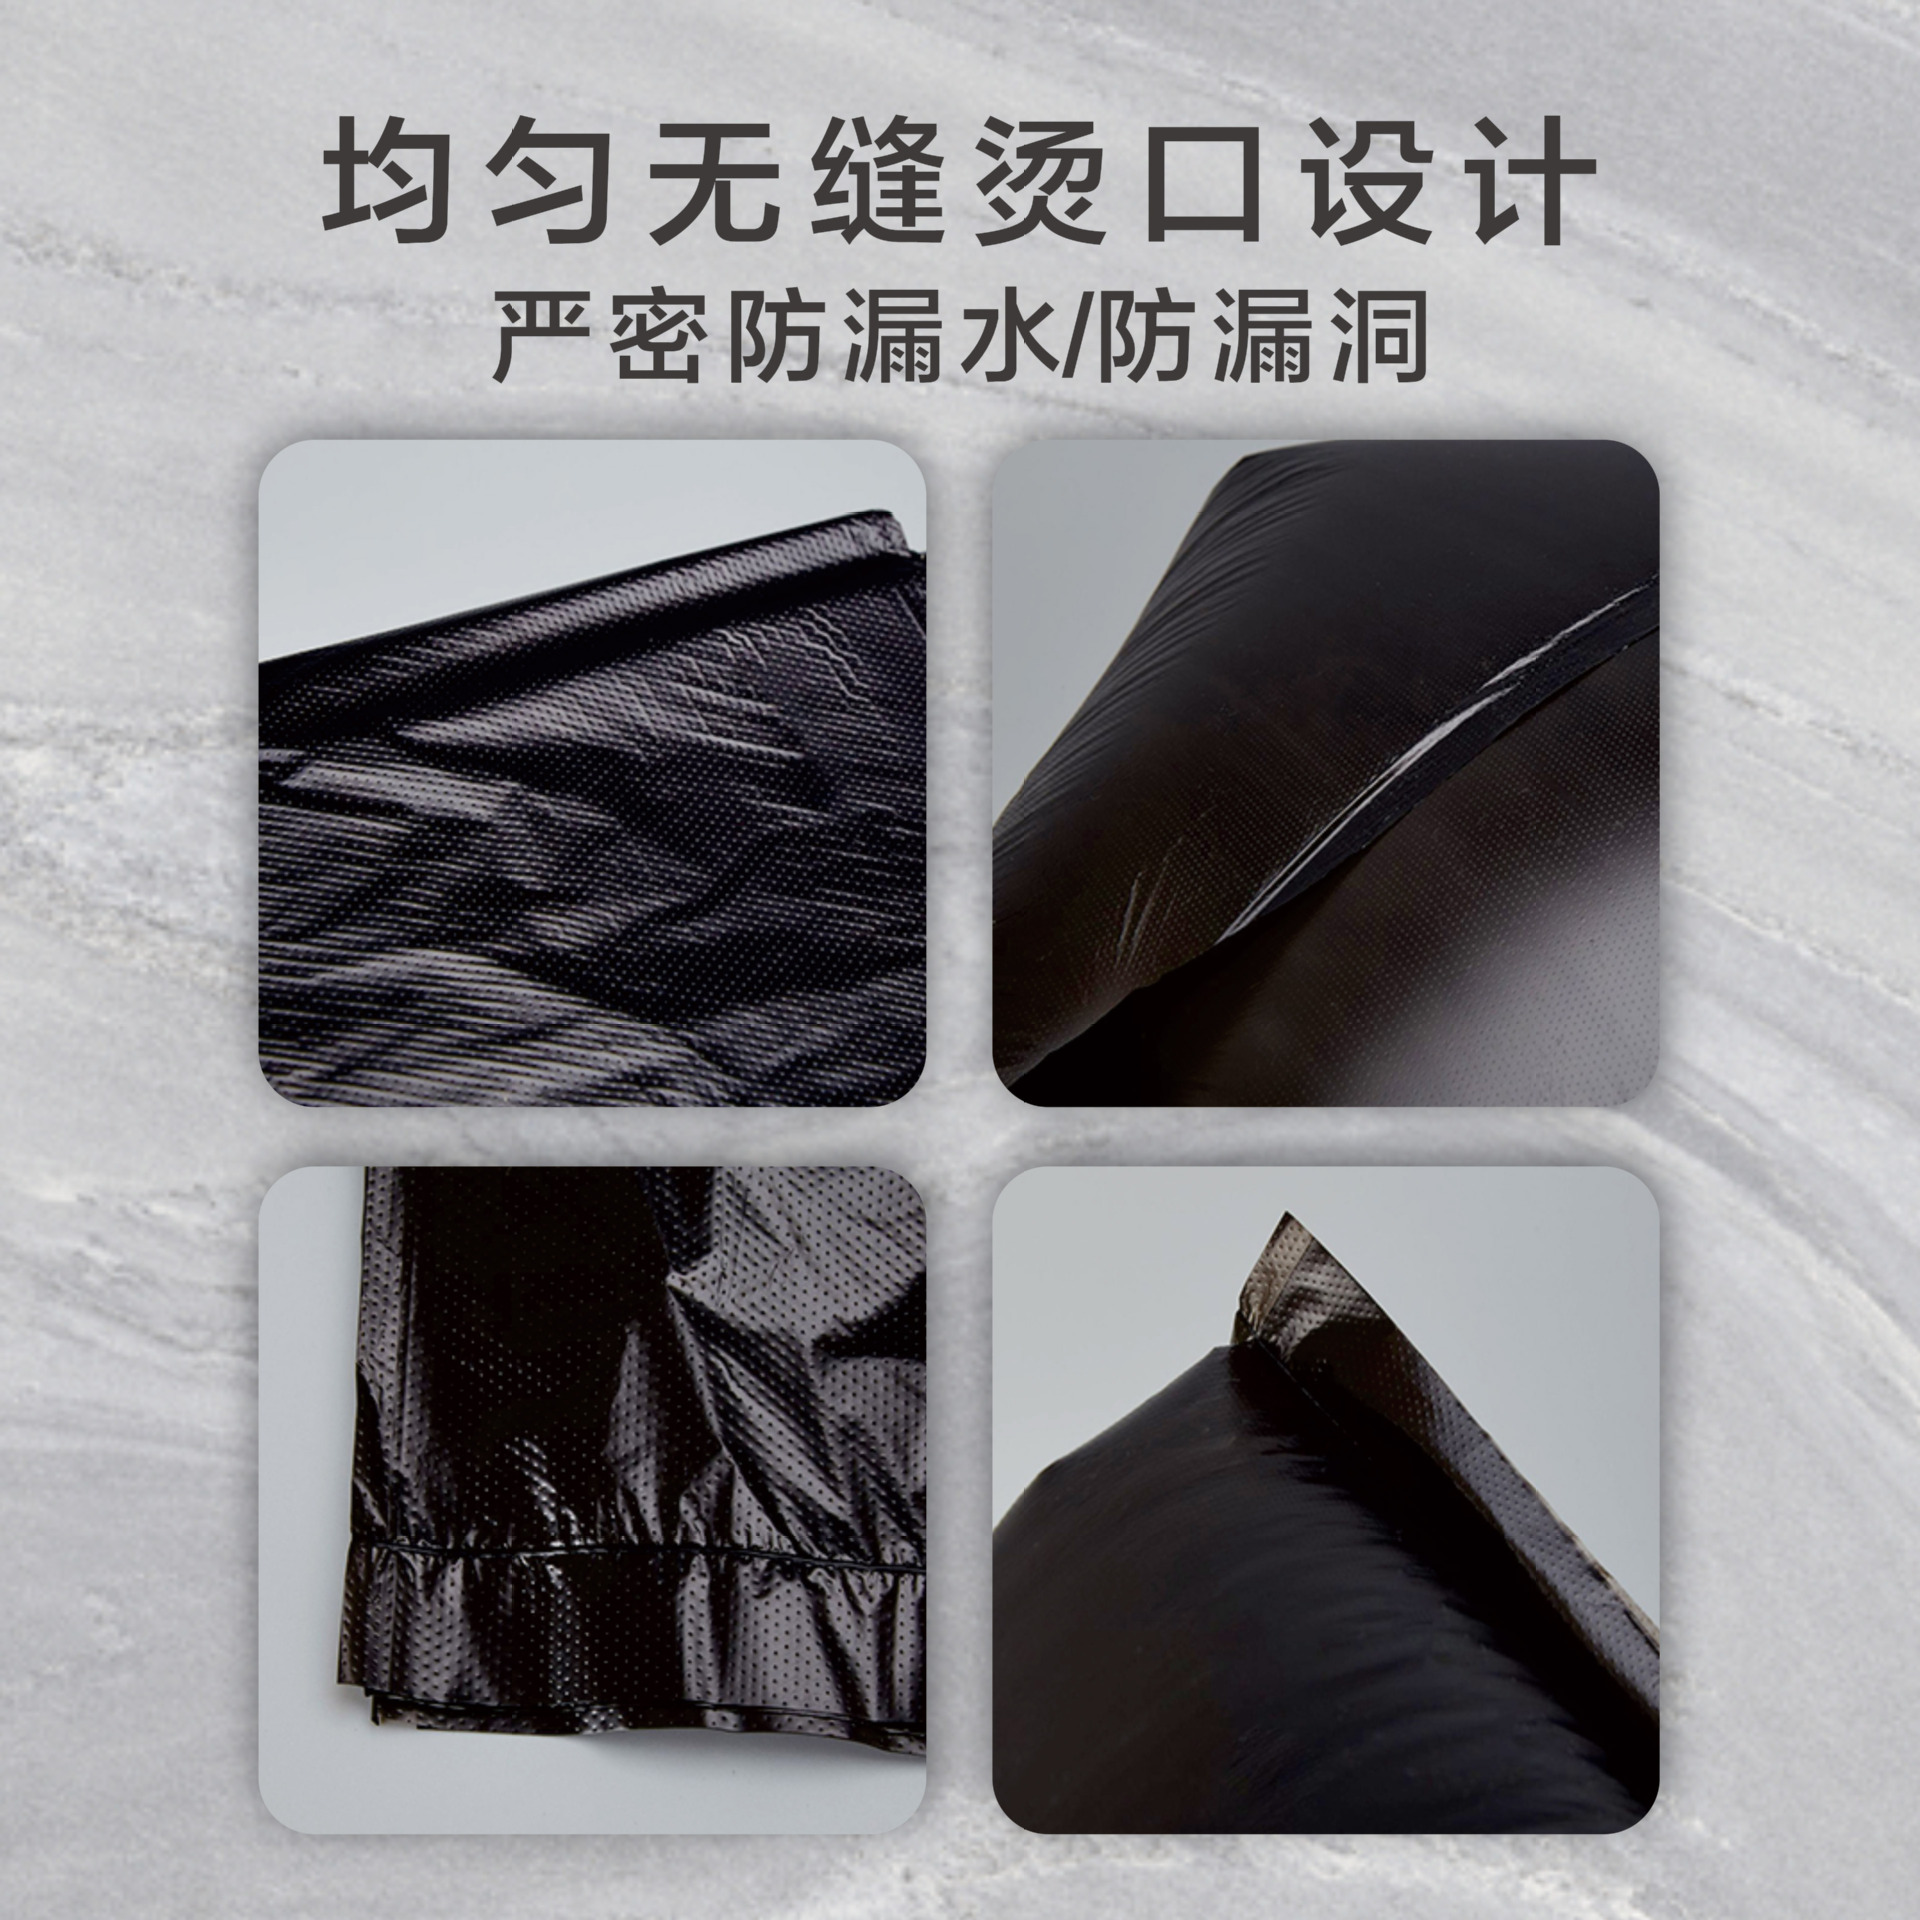 Black Large Garbage Bag Thickened Extra Large Commercial Household Property and Sanitation Hotel Free Shipping Large Wholesale Factory